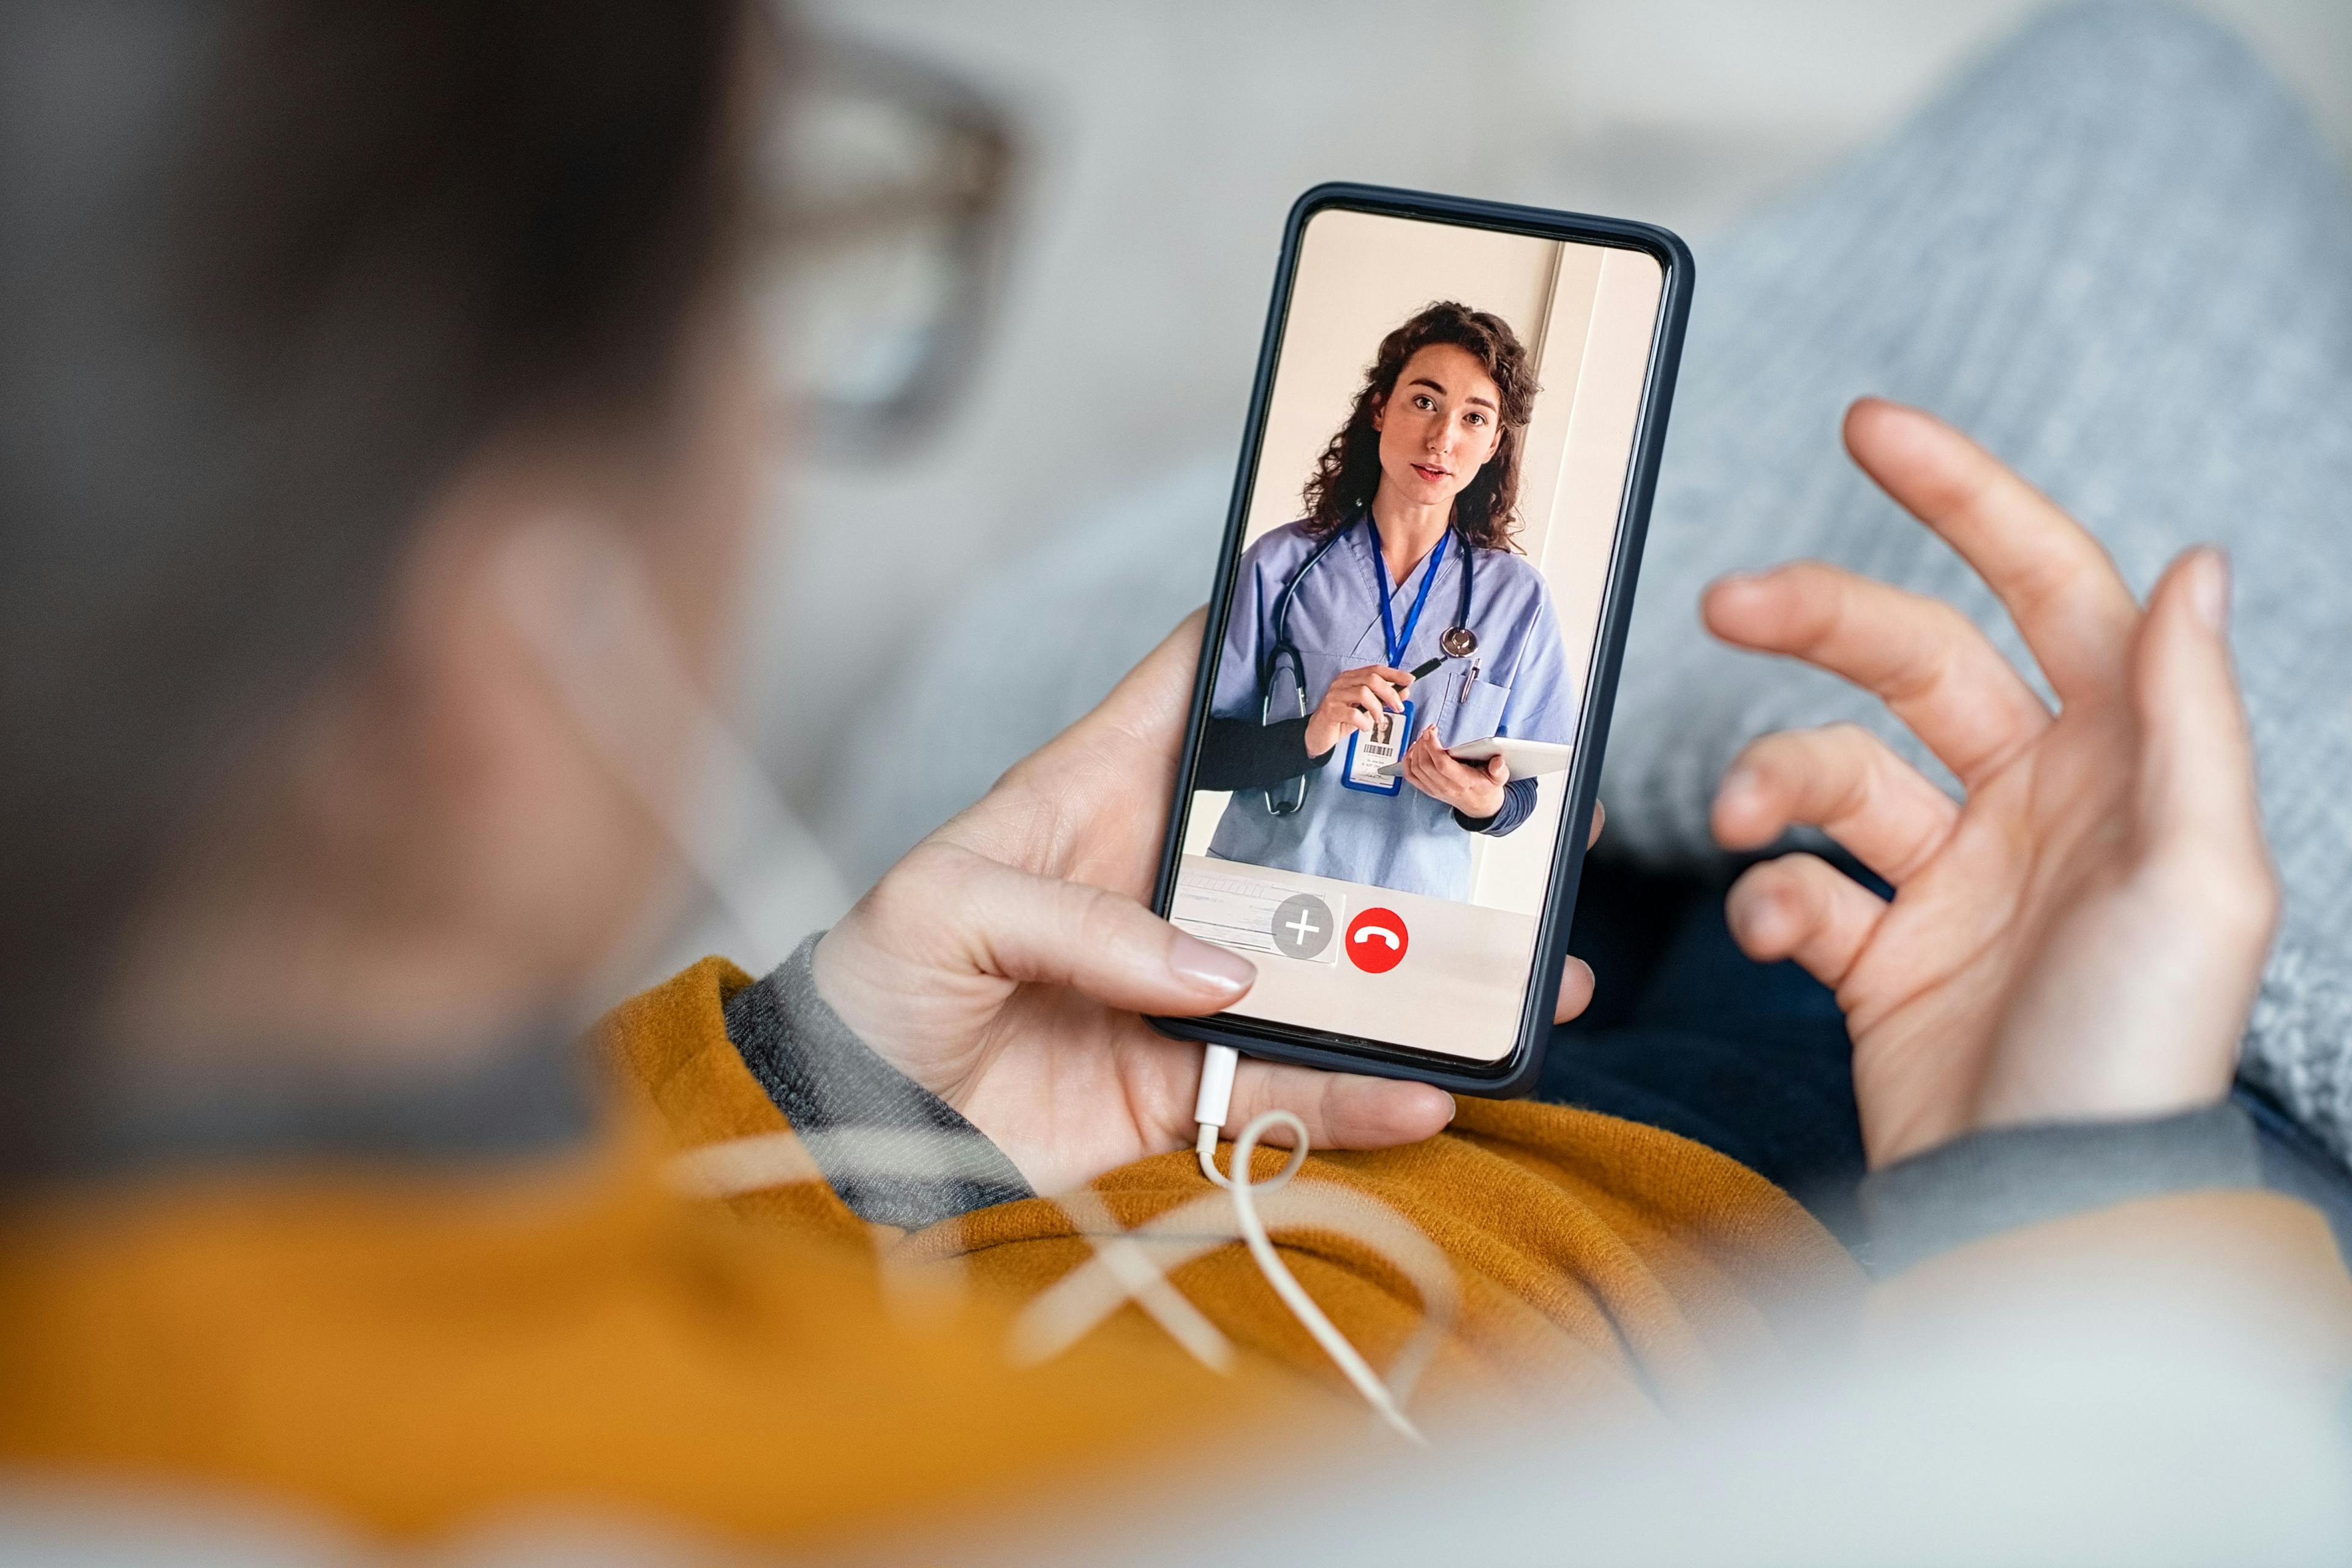 Study finds telehealth use after pandemic uncertain